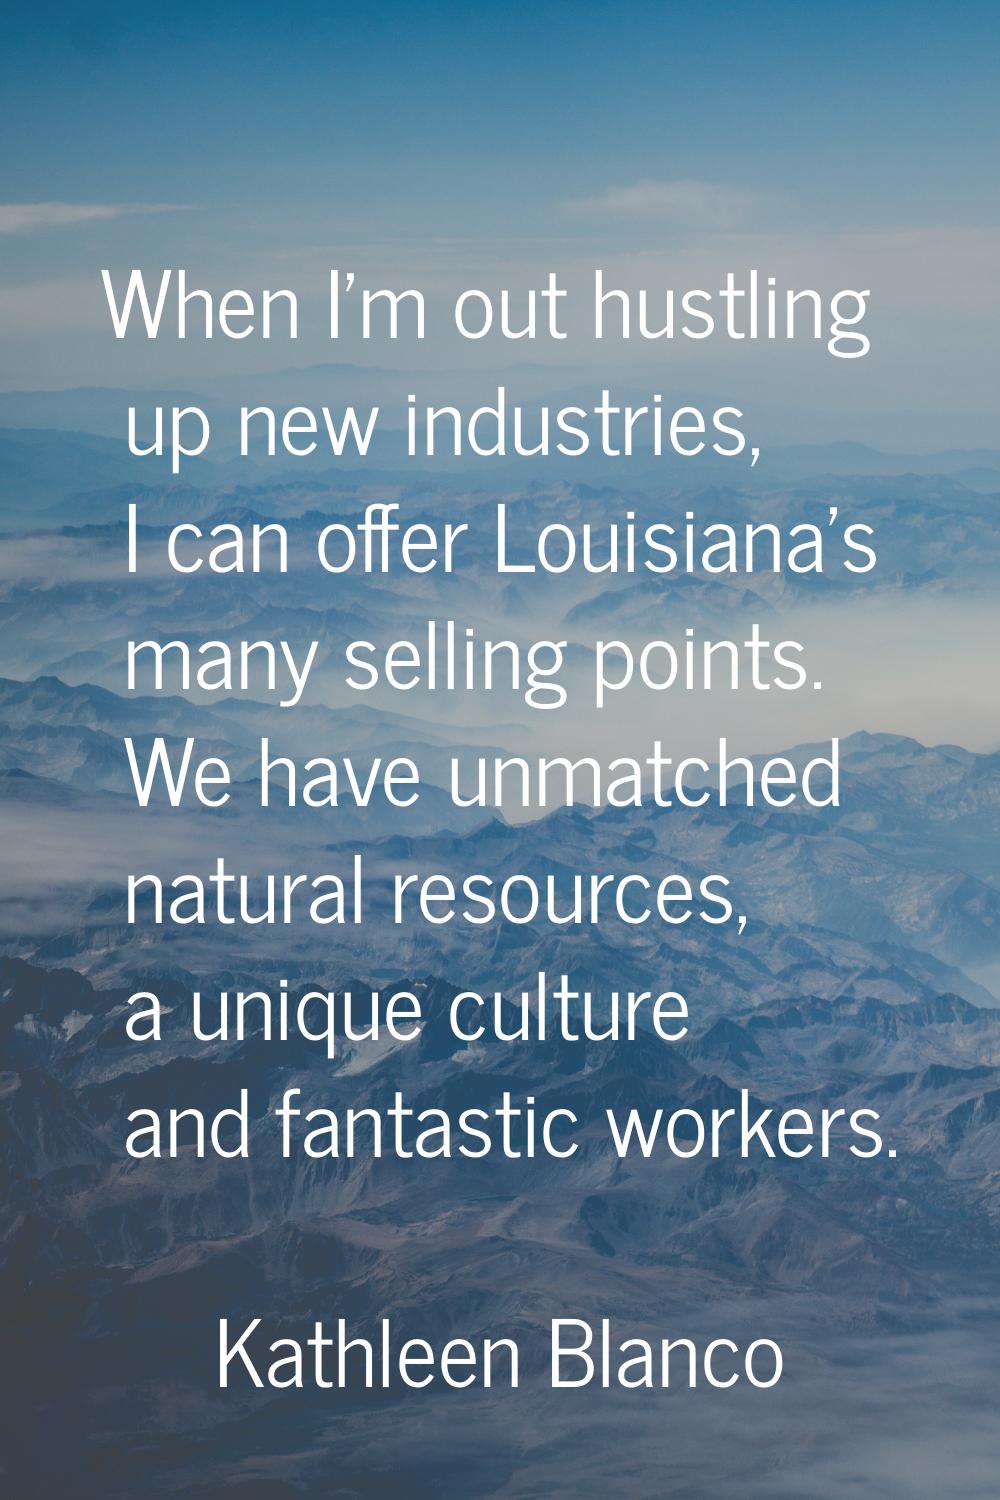 When I'm out hustling up new industries, I can offer Louisiana's many selling points. We have unmat